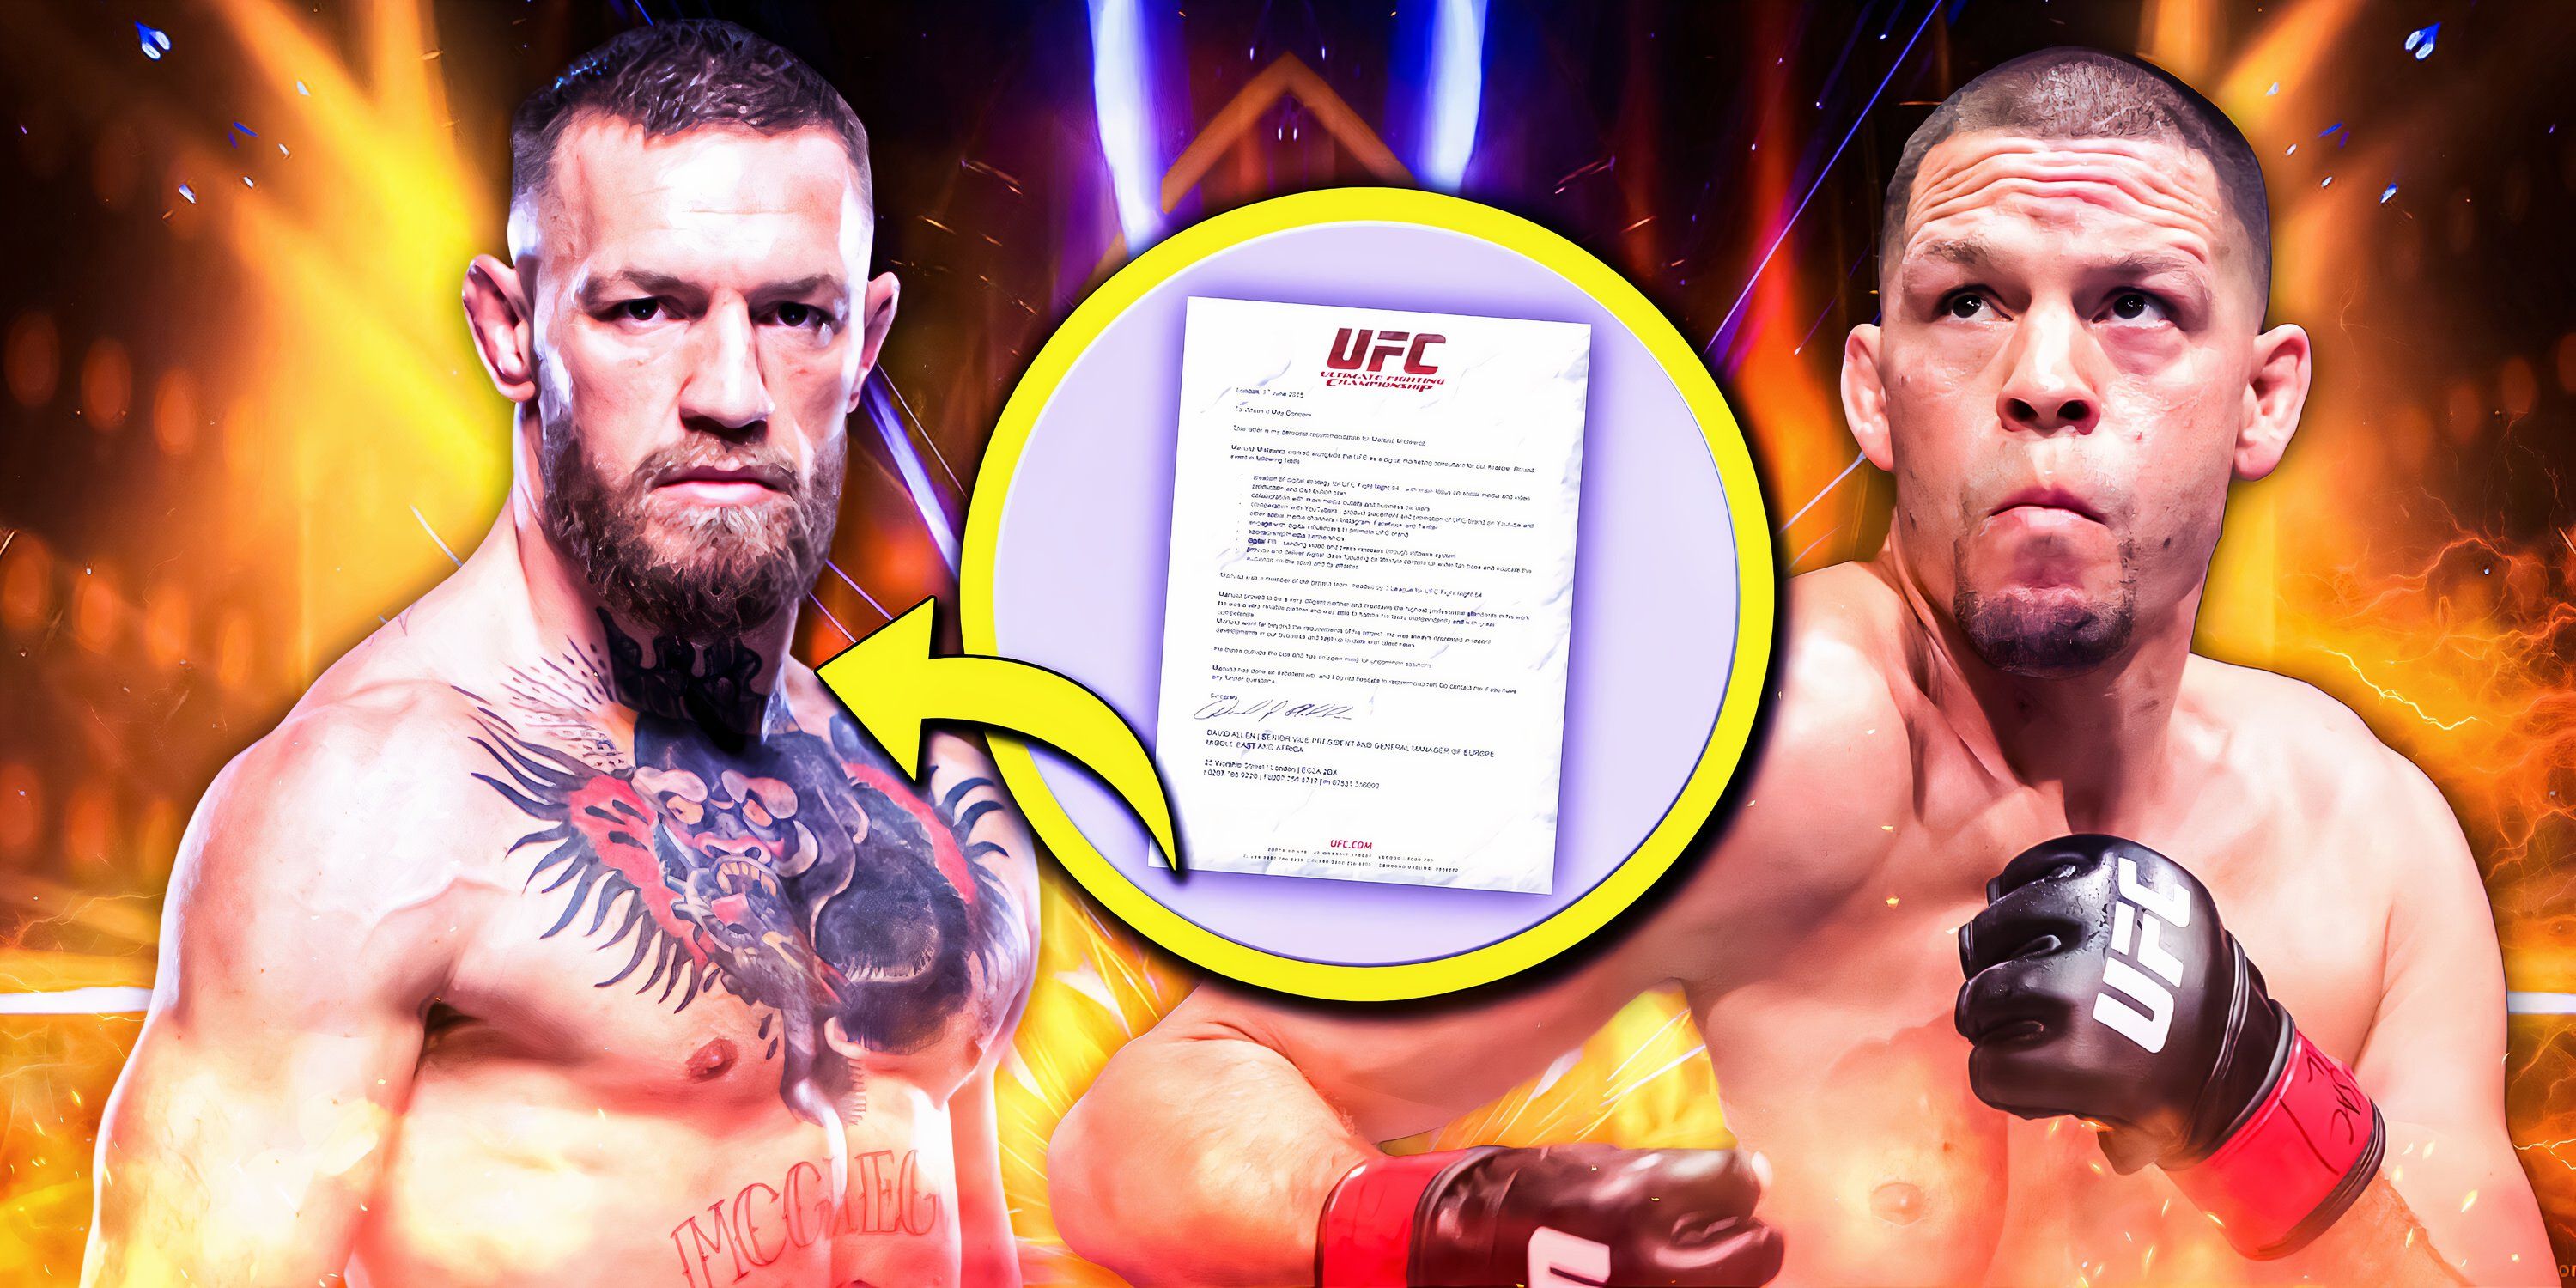 Conor McGregor, UFC contract, and Nate Diaz